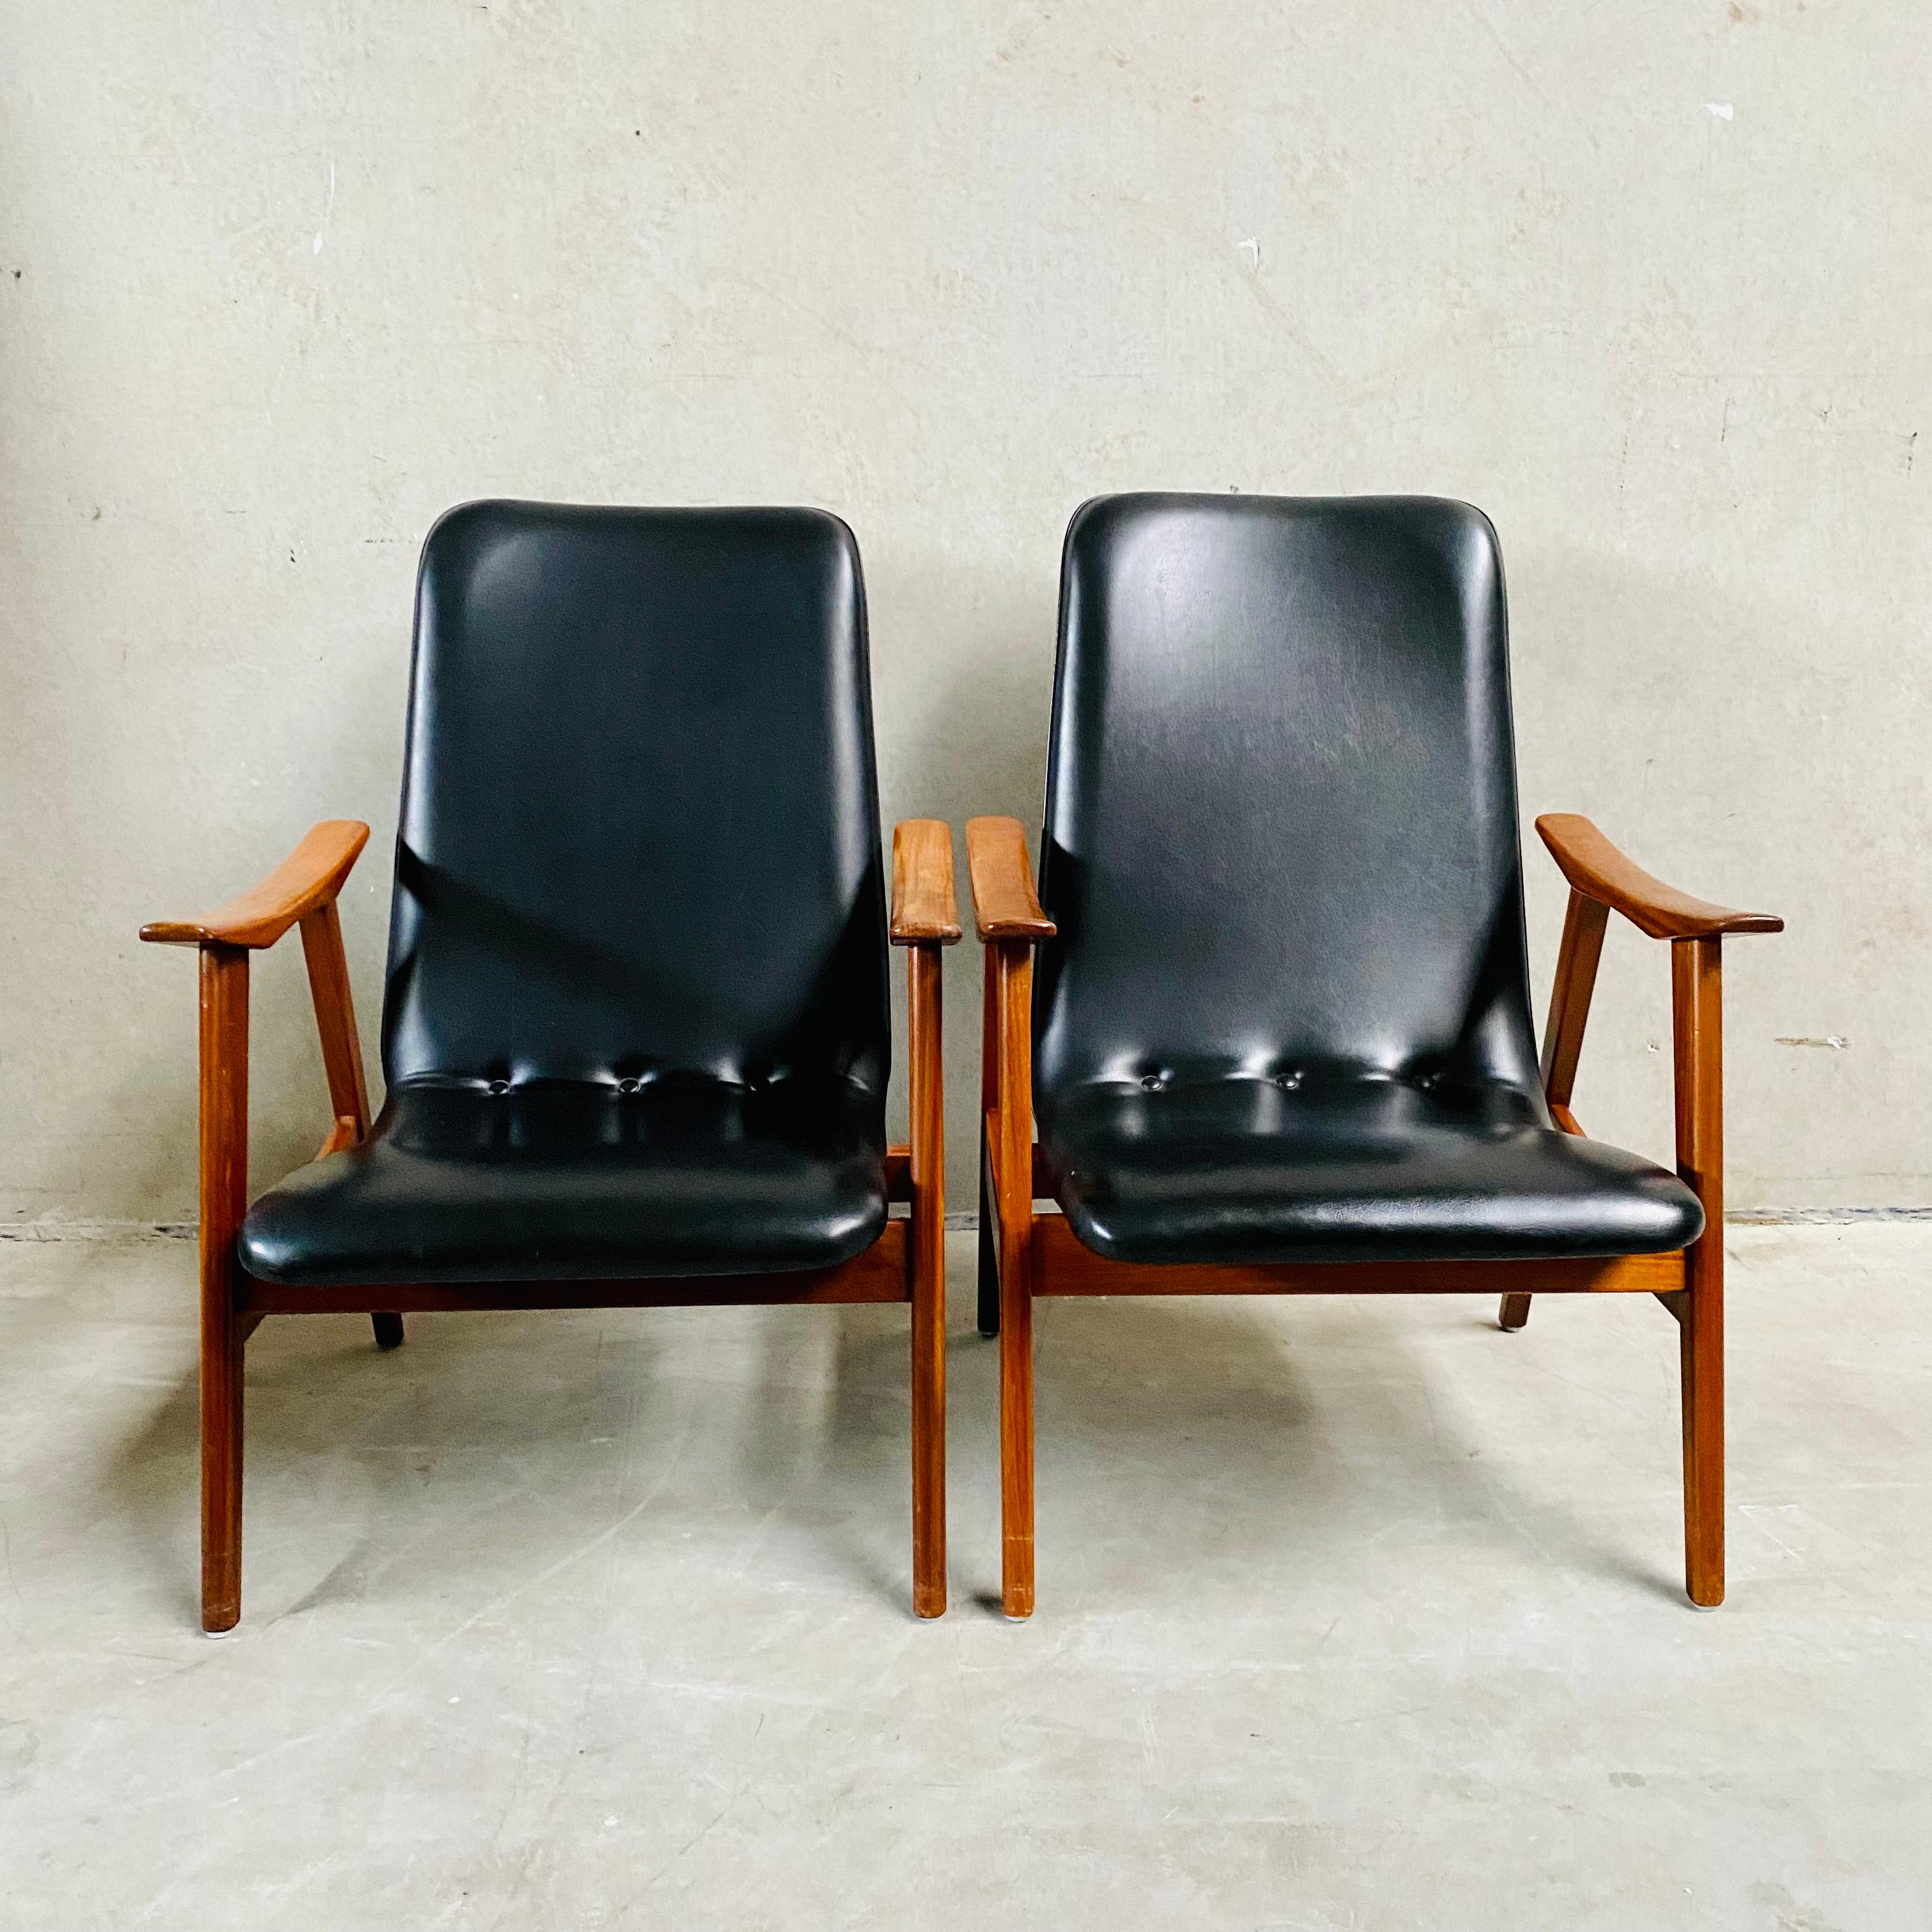 Mid-Century Modern Set of Two Louis Van Teeffelen for Webe Lounge Chairs, Netherlands, 1960s For Sale